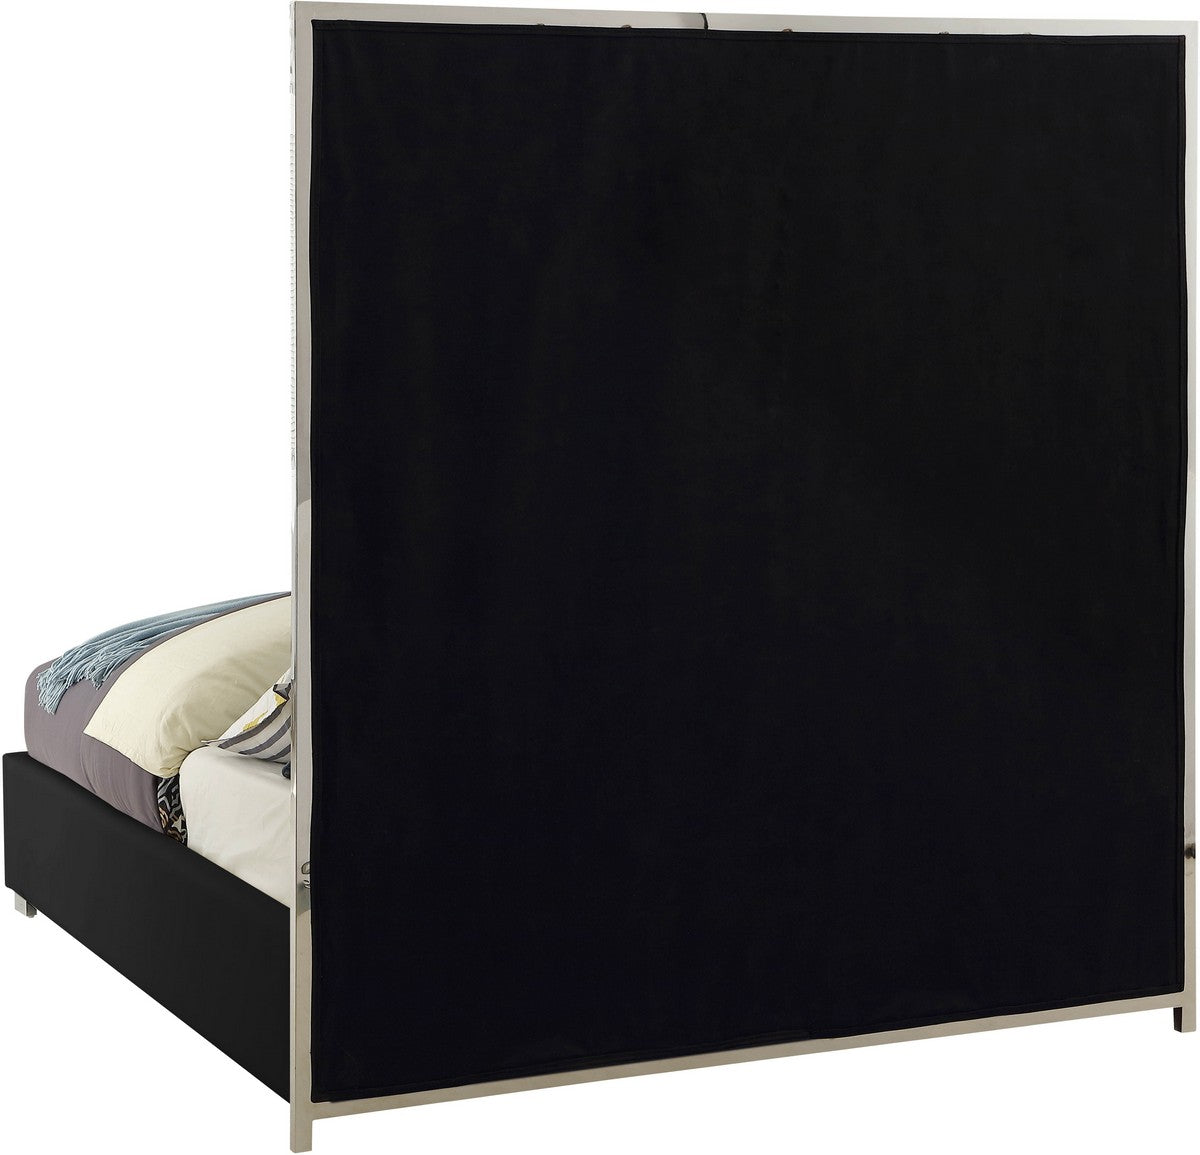 Meridian Furniture Milan Black Faux Leather Queen Bed